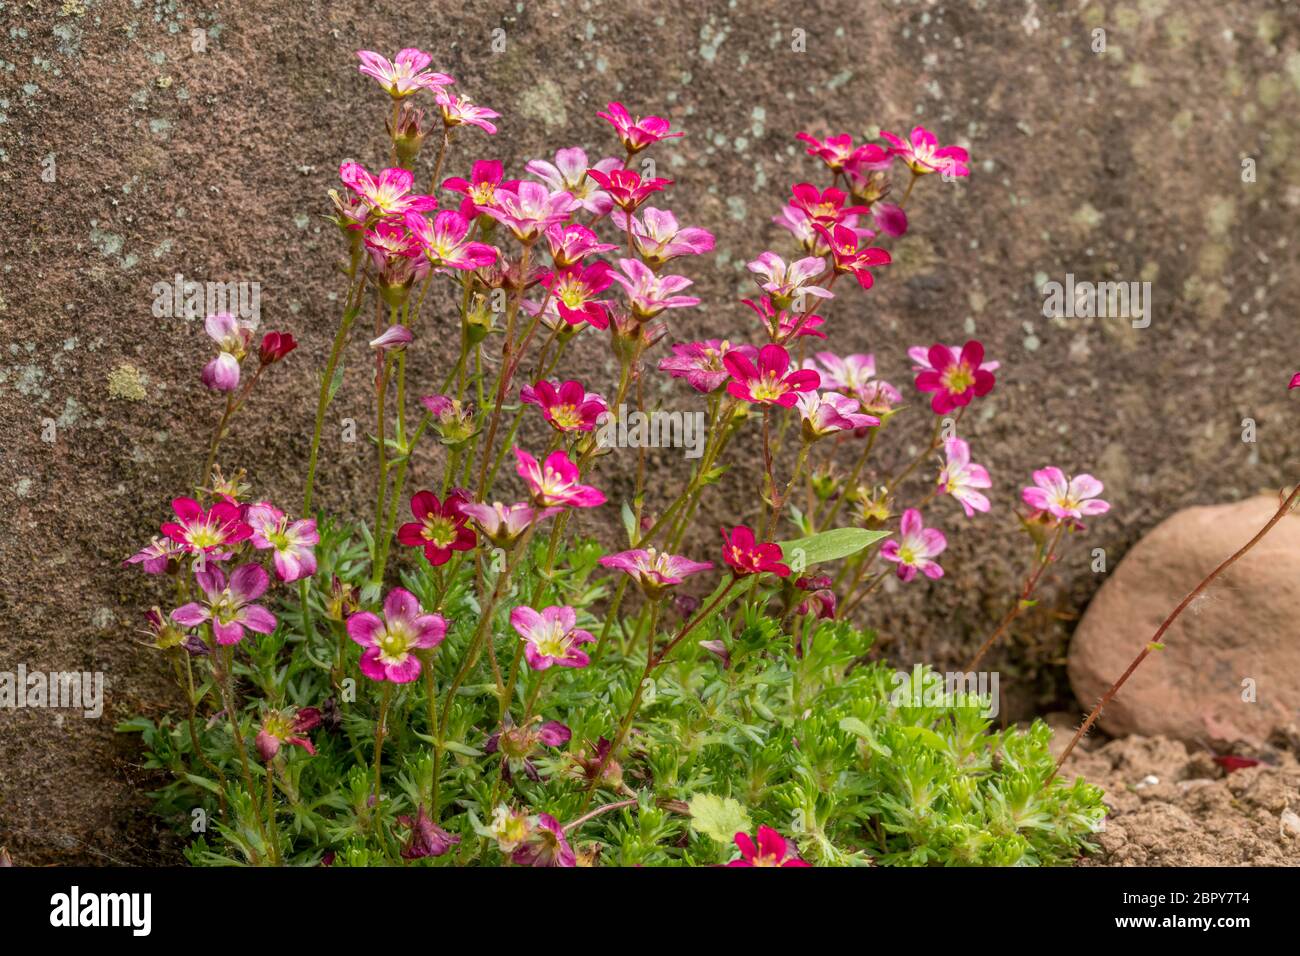 Moss saxifrage with pink flowers in a flower bed in front of a sandstone Stock Photo